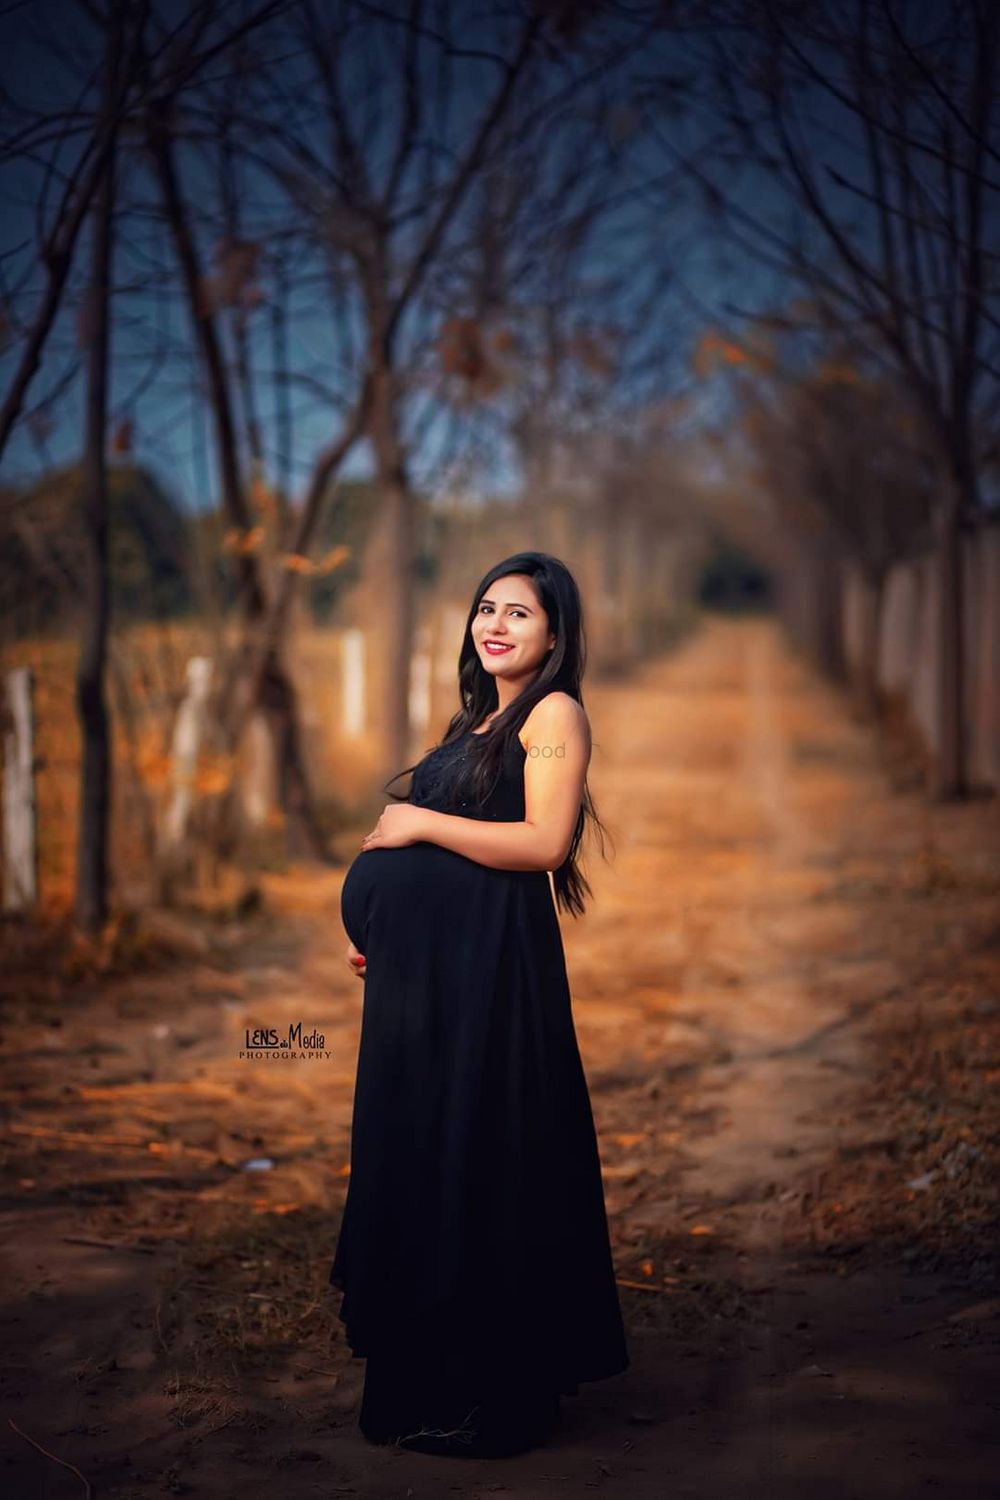 Photo From Maternity Shoot - By Lens Media Photography